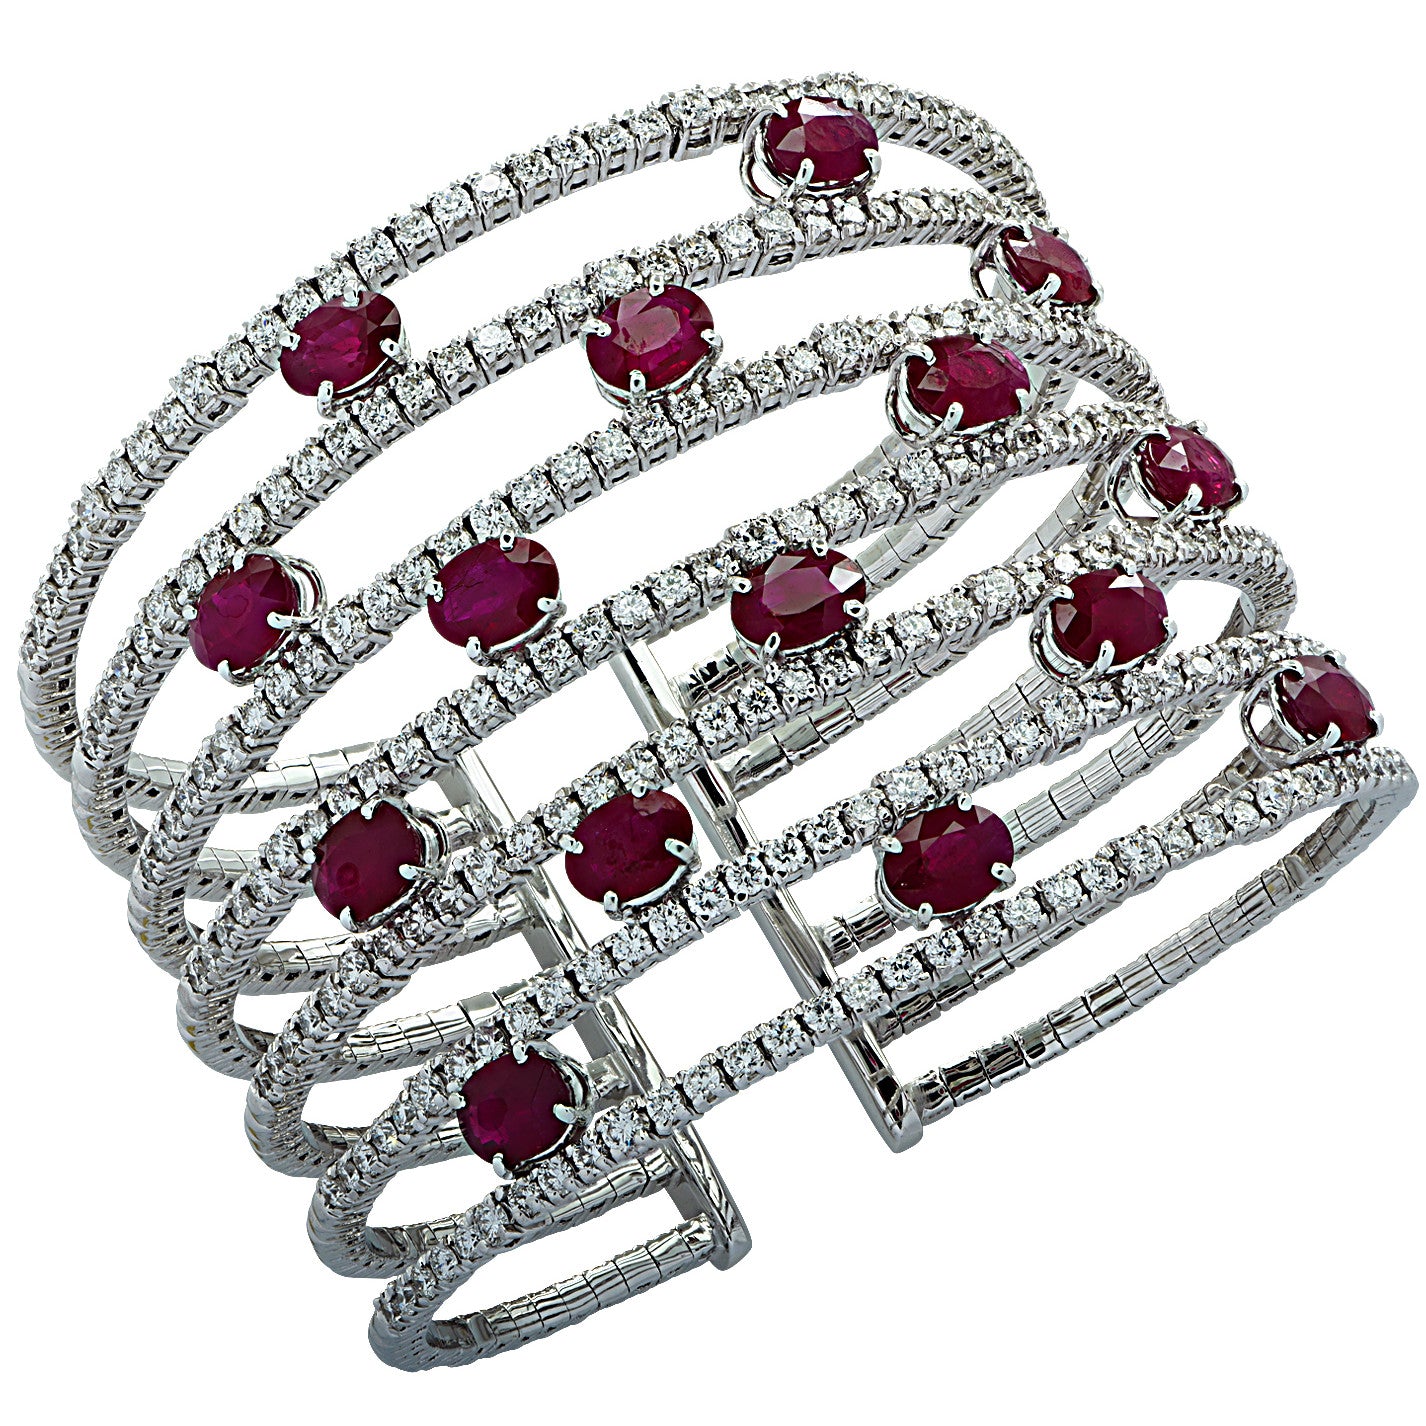 Post-1980s 18KT White Gold Ruby & Diamond Cuff Bracelet front view